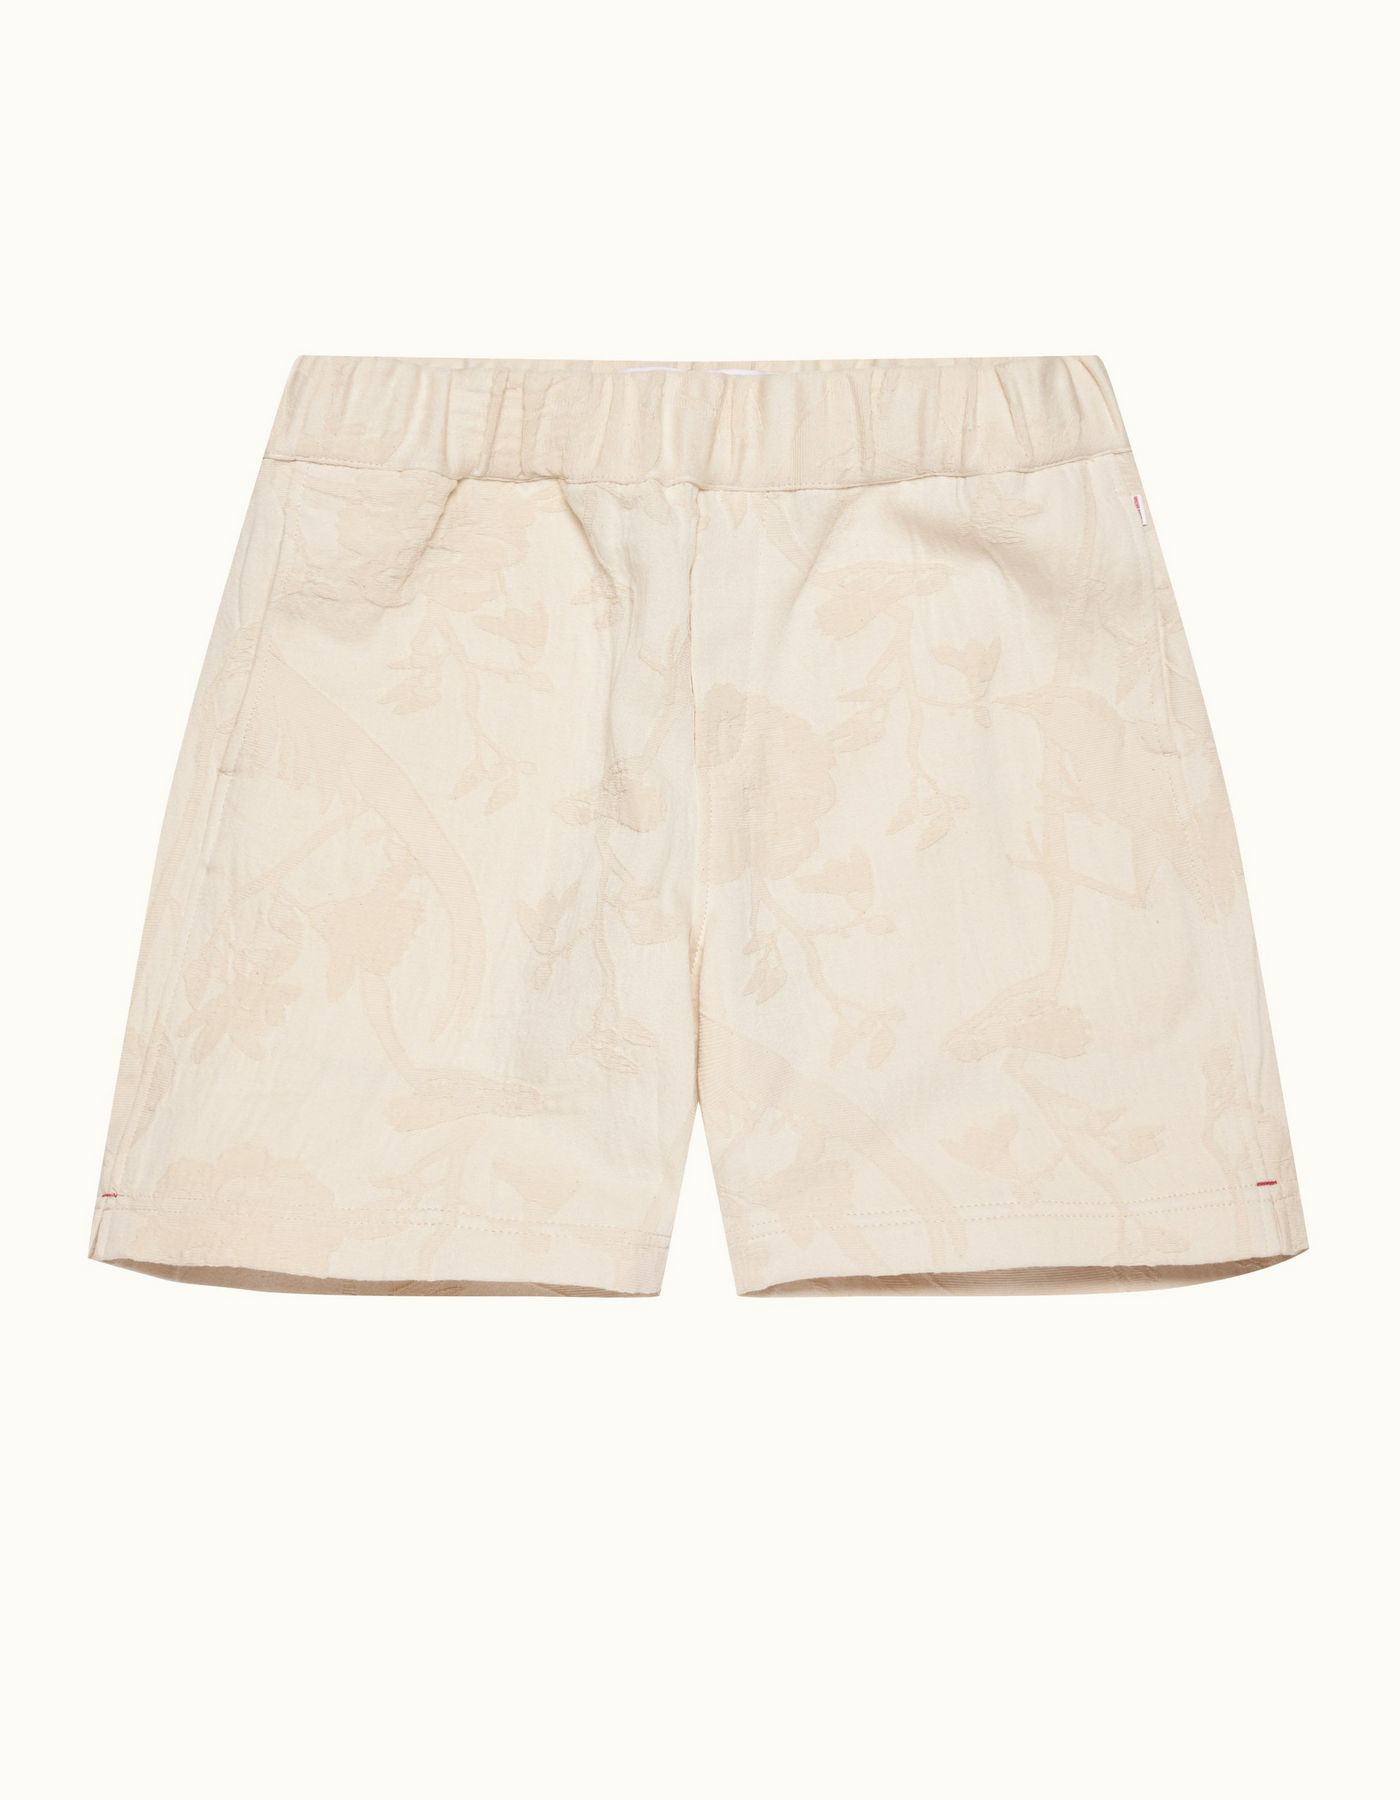 Louis - Mens White Sand Flight Of Fantasy Relaxed Fit Shorts